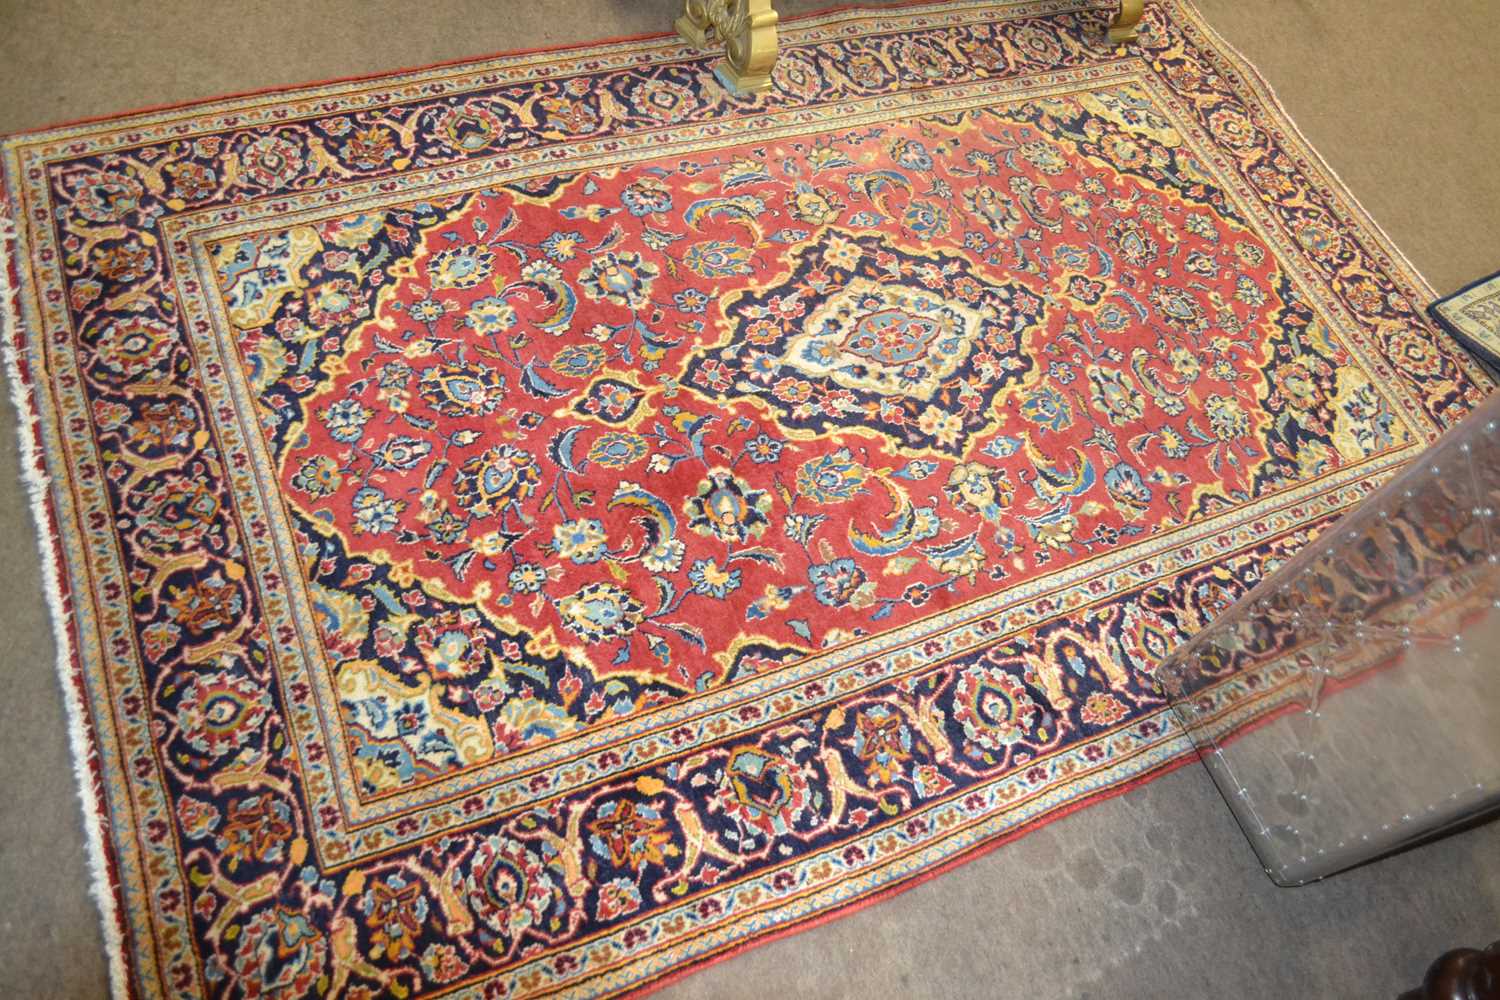 A contemporary Kashan rug with central red panel, 2.12 x 1.4 metres